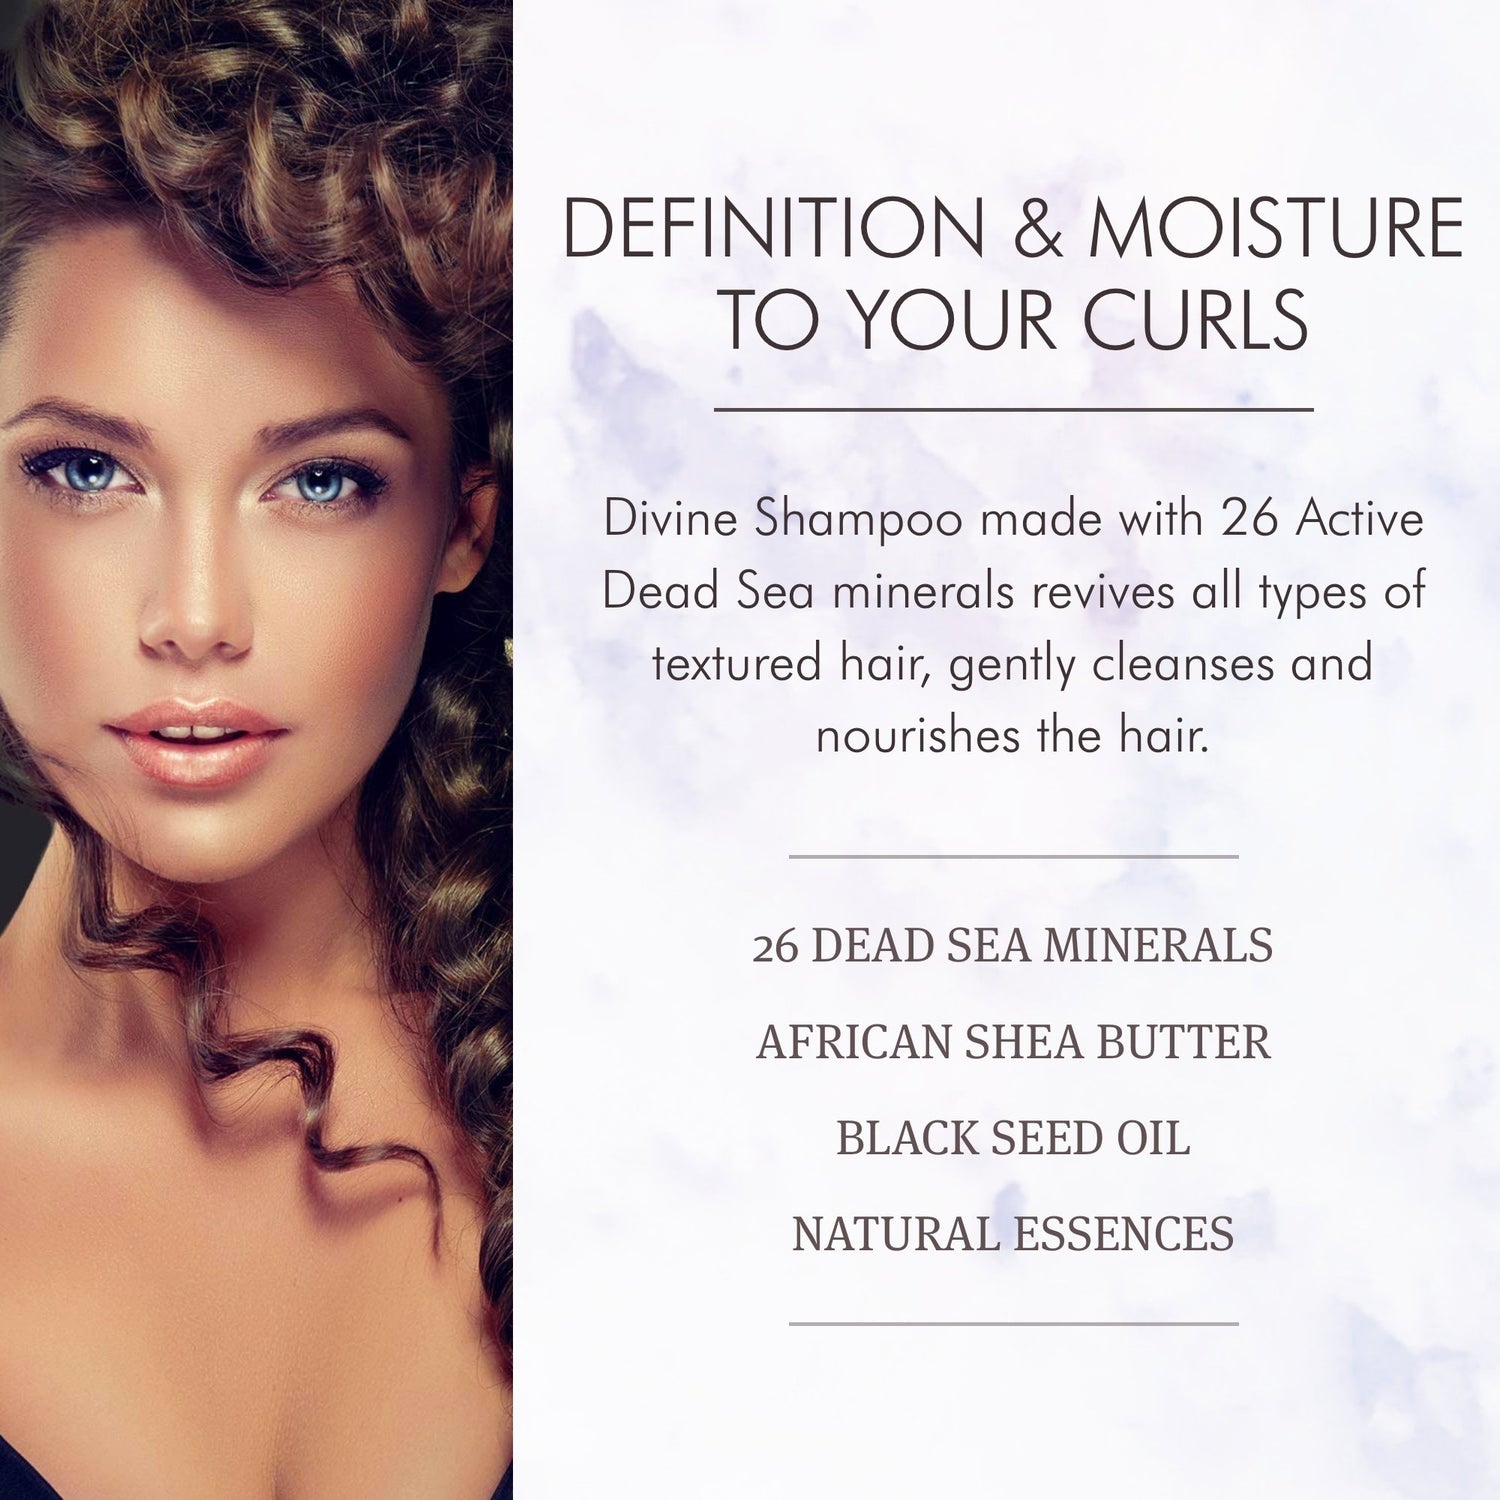 Saphira Divine Shampoo gives Definition & Moisture to Your Curls, with 26 Dead Sea Minerals, African Shea Butter, Black Seed Oil and Natural Essences.